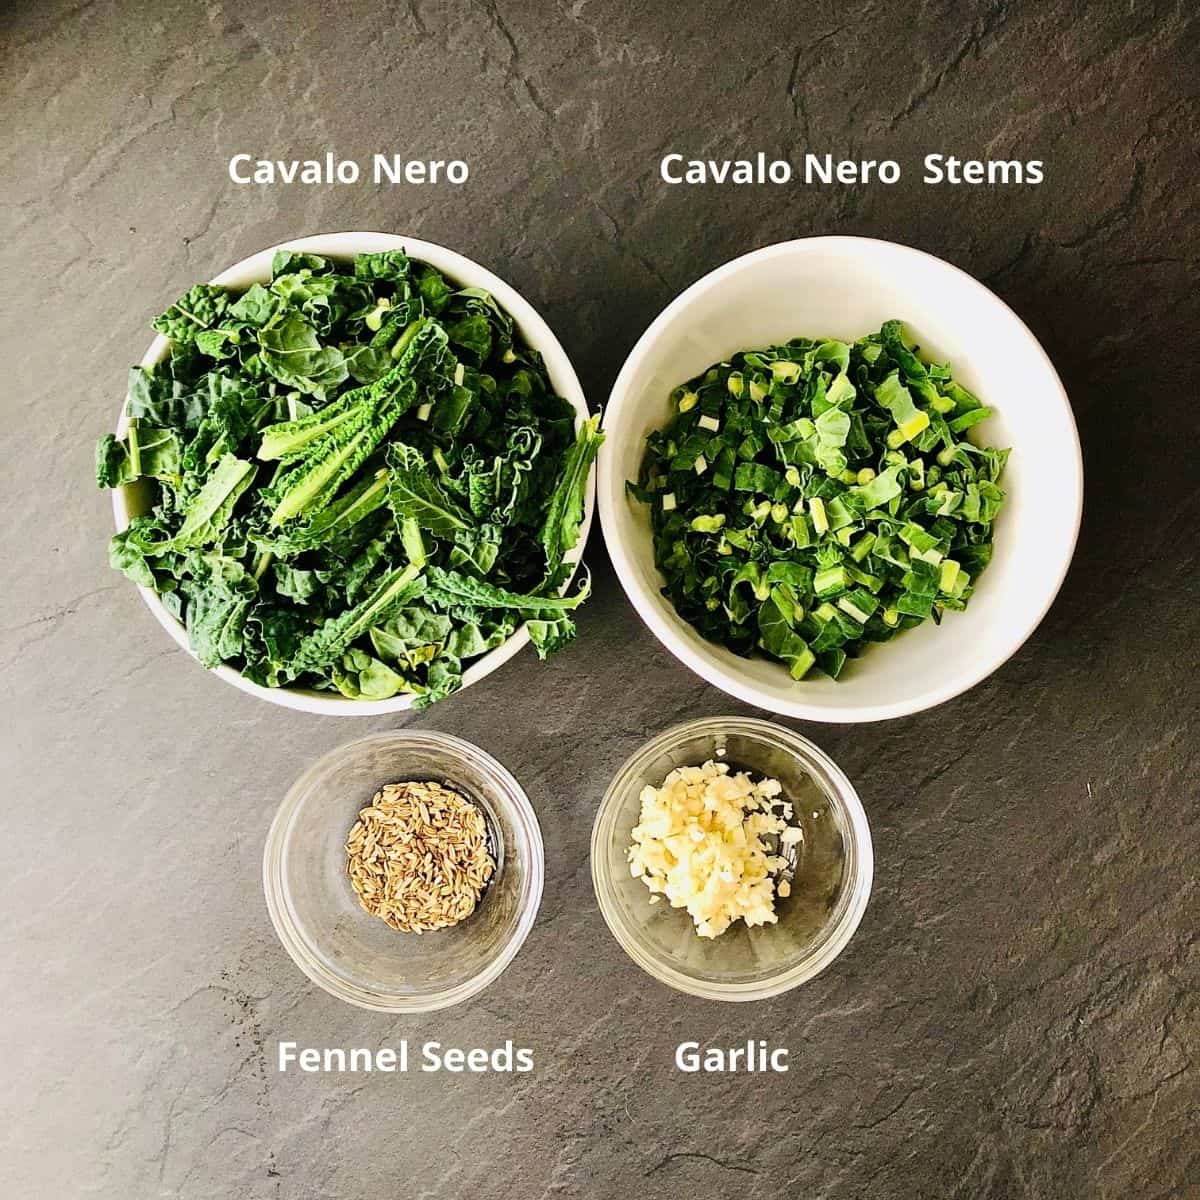 Ingredients for cavalo nero in small dishes. Annotated